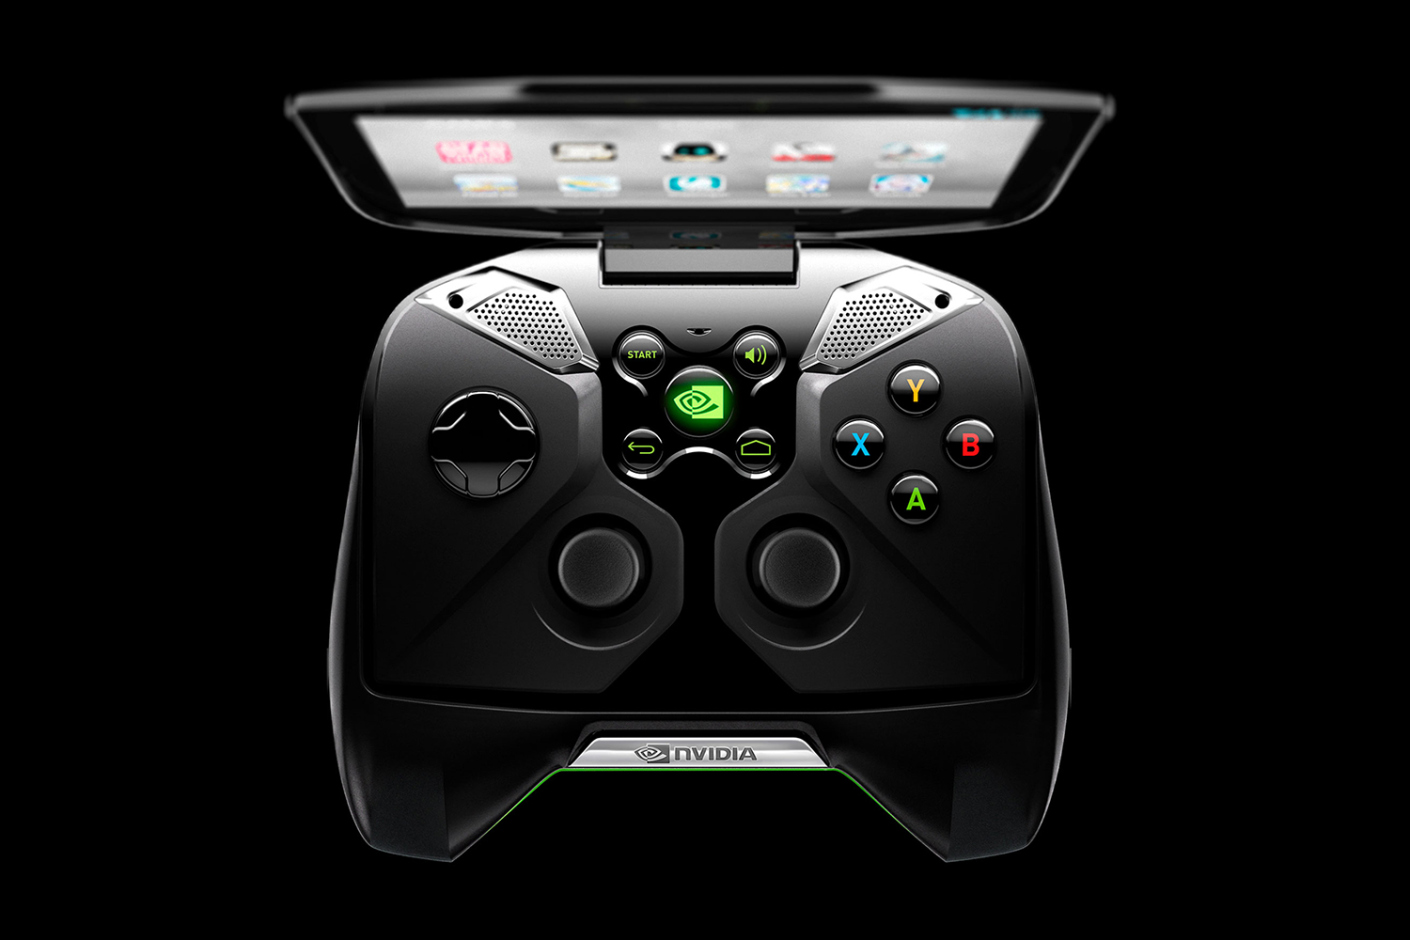 Does the Nvidia Shield have GeForce NOW?